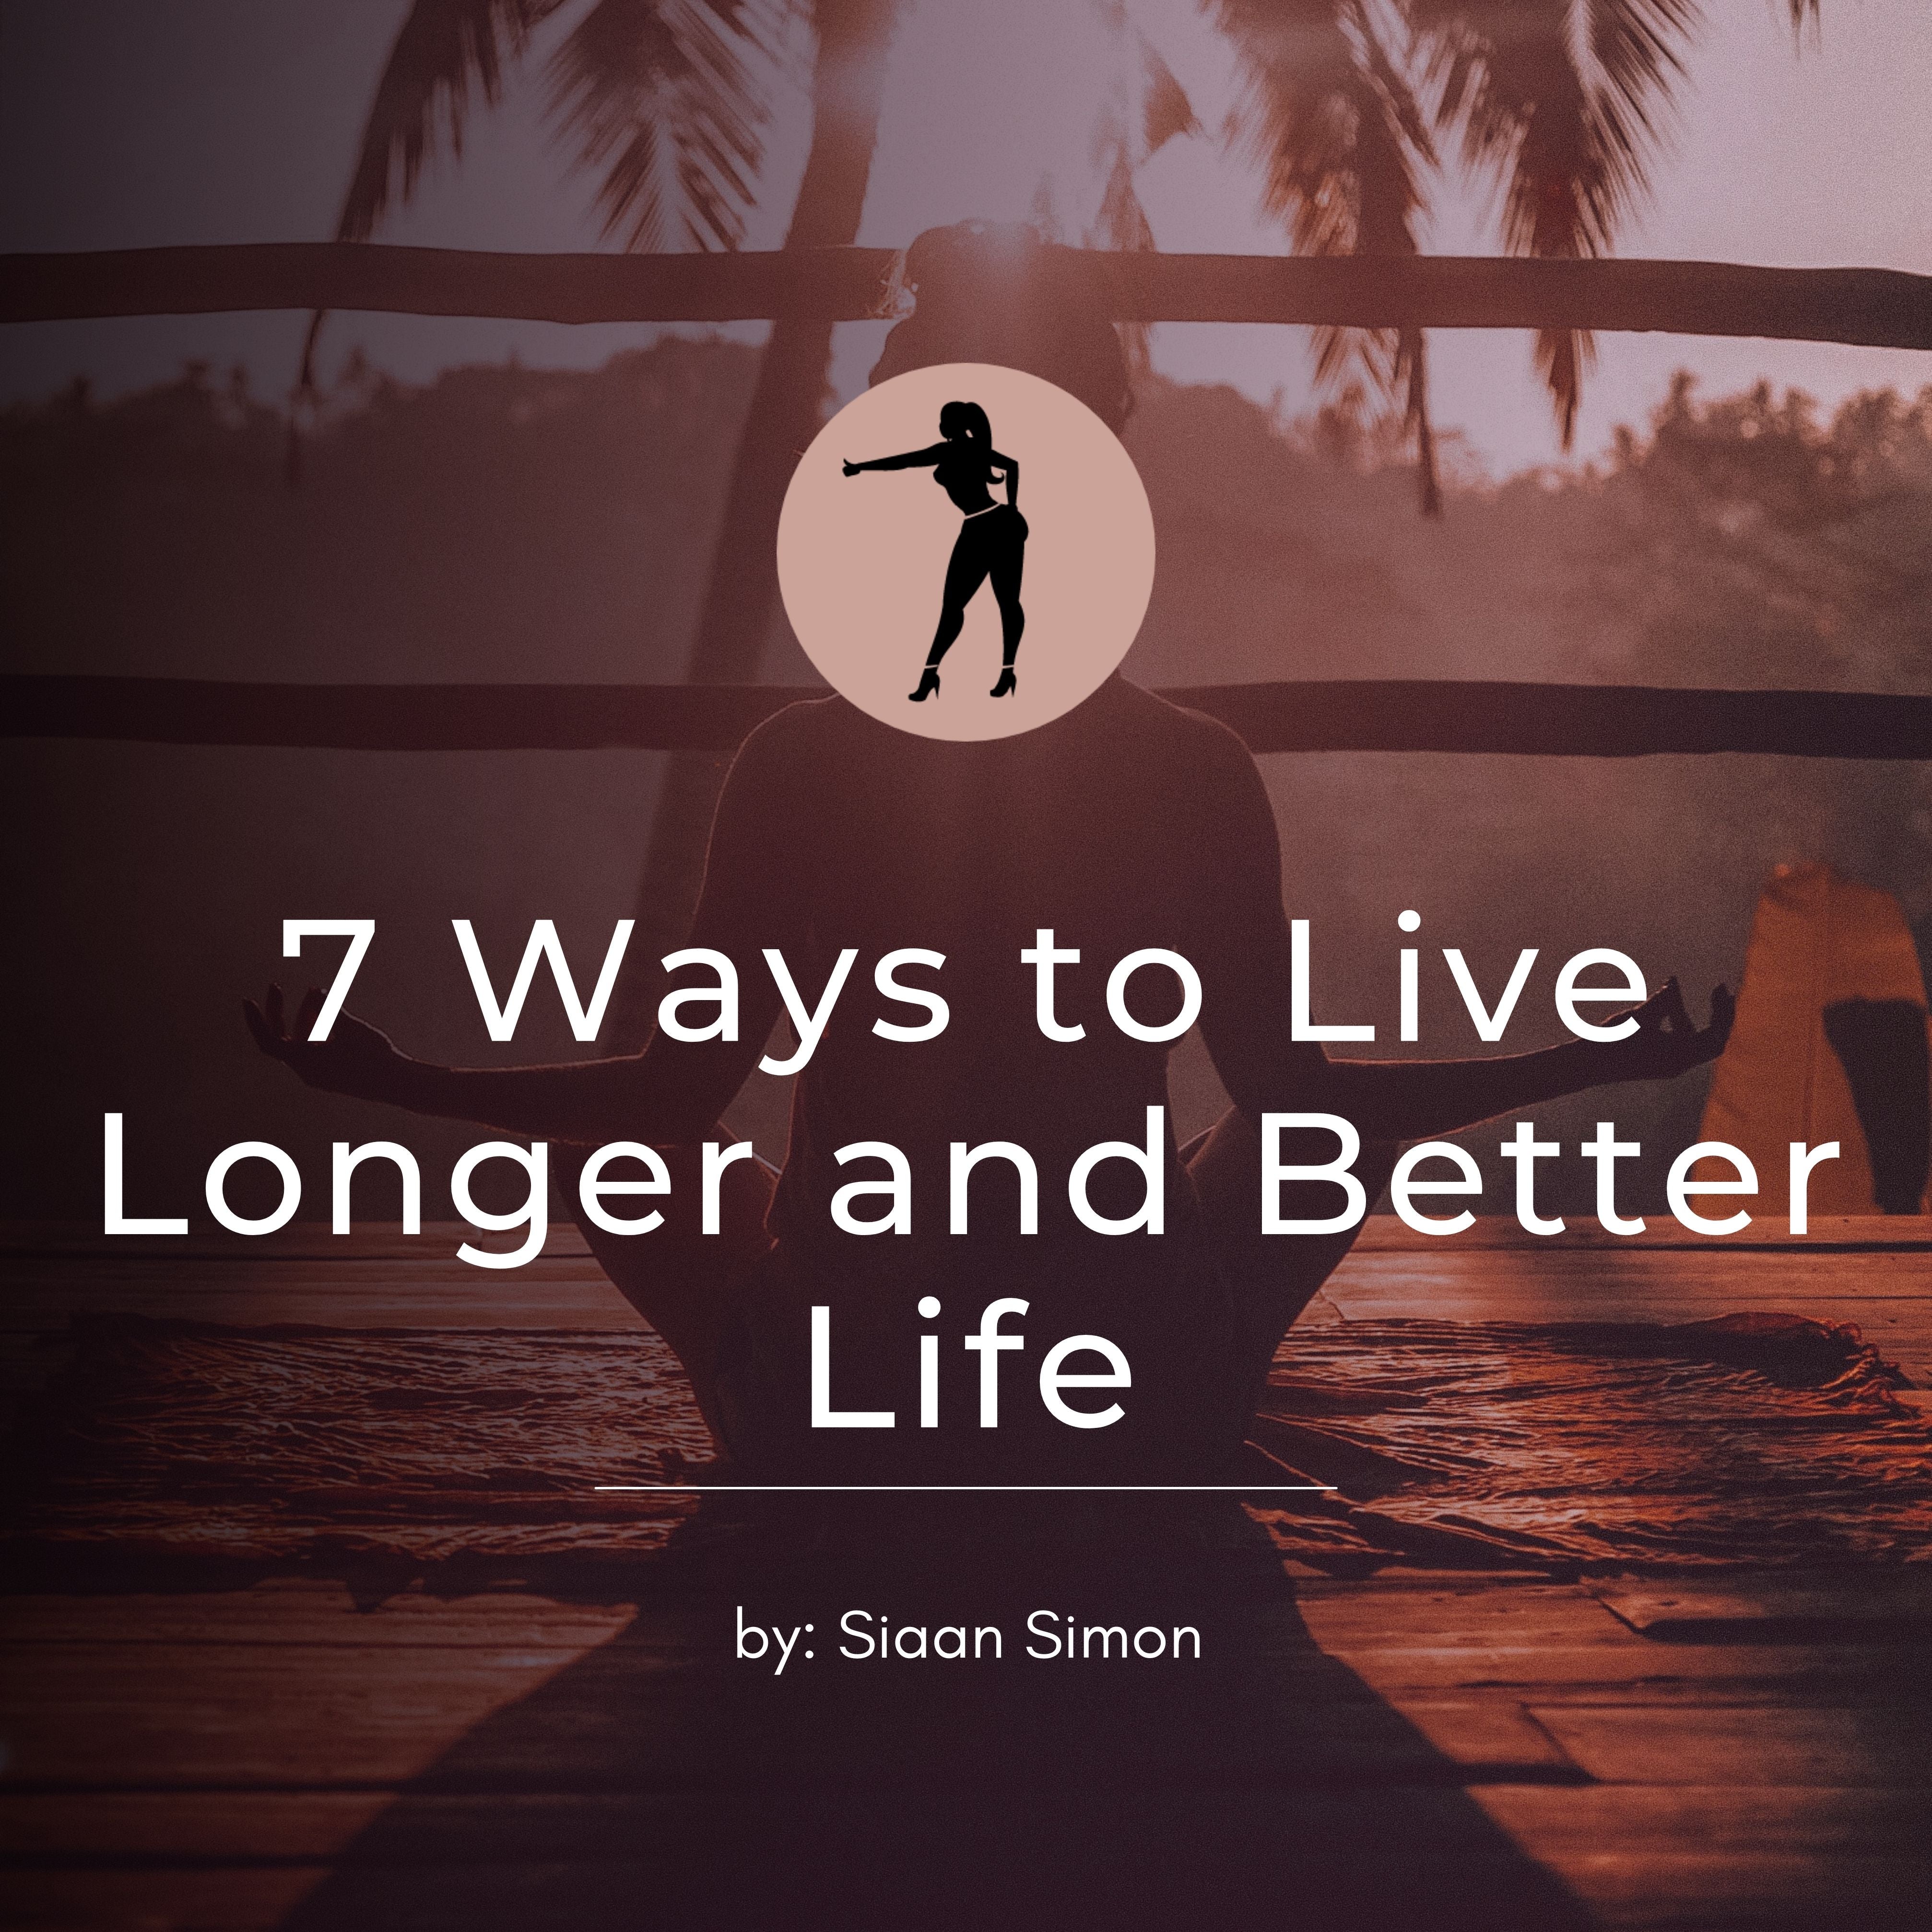 7 Way to Living Longer and Better Life